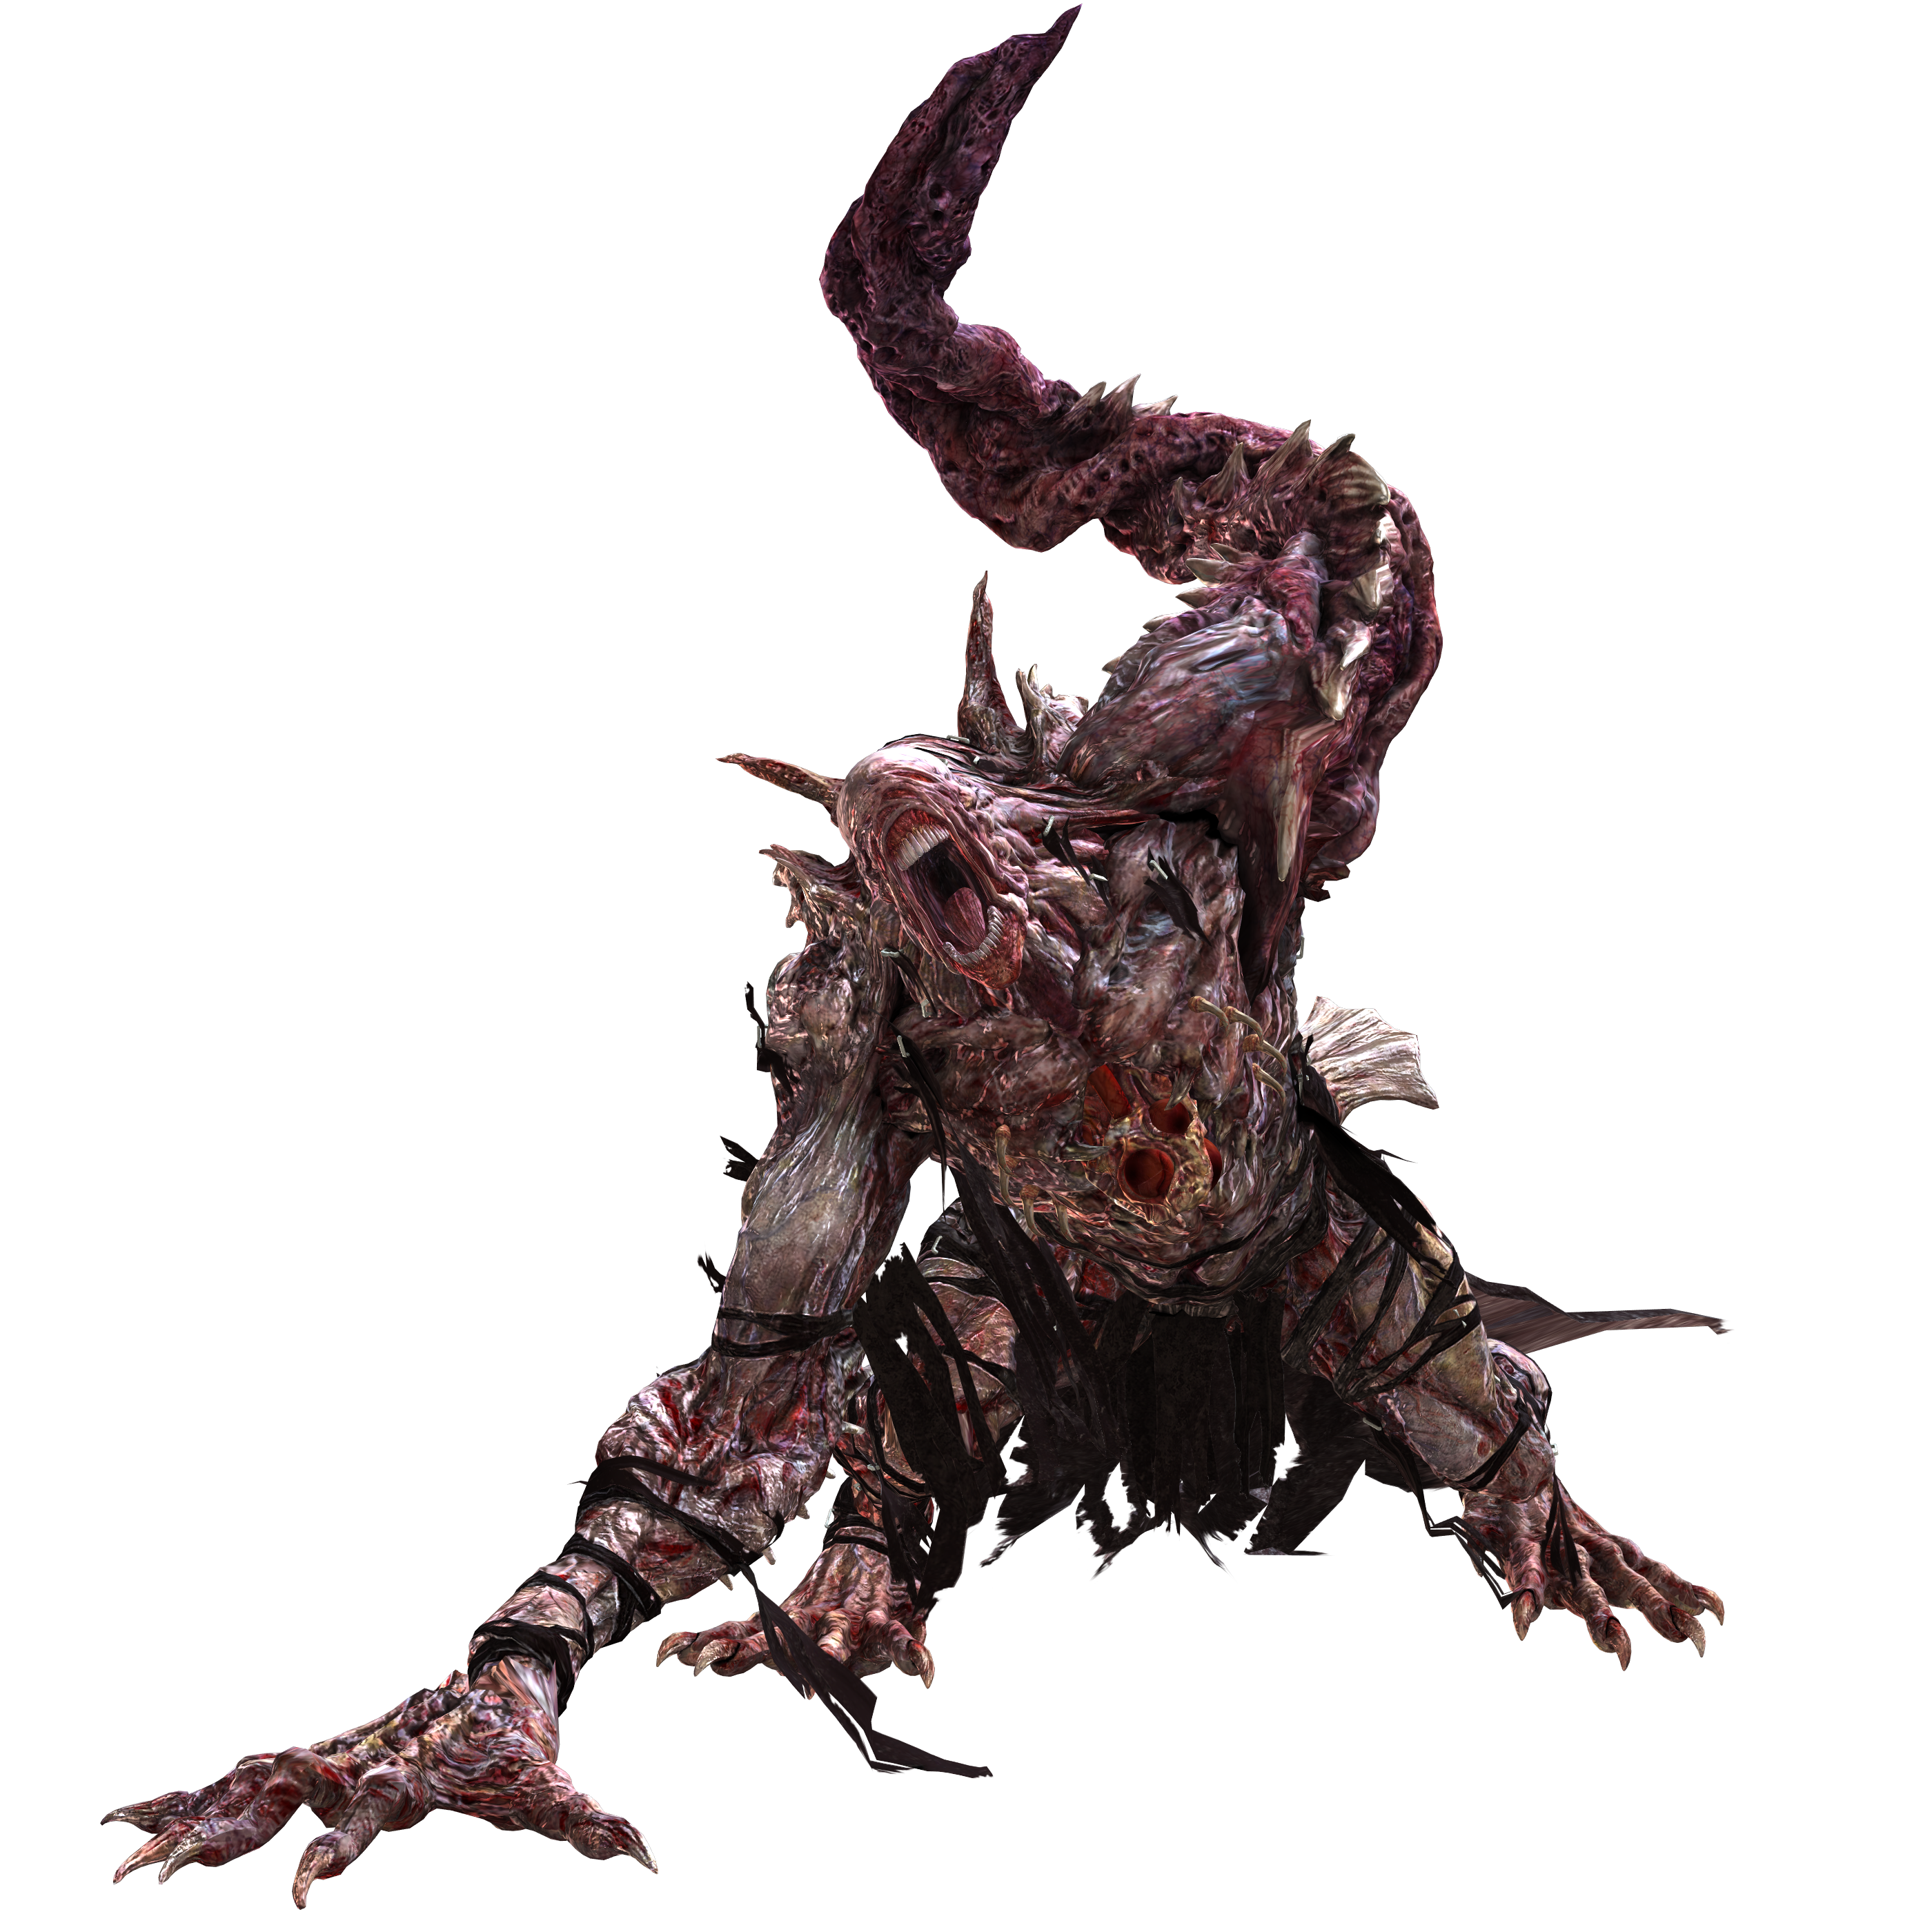 Resident Evil 3 Team Is 'Determined to Surpass' Mr X with Nemesis